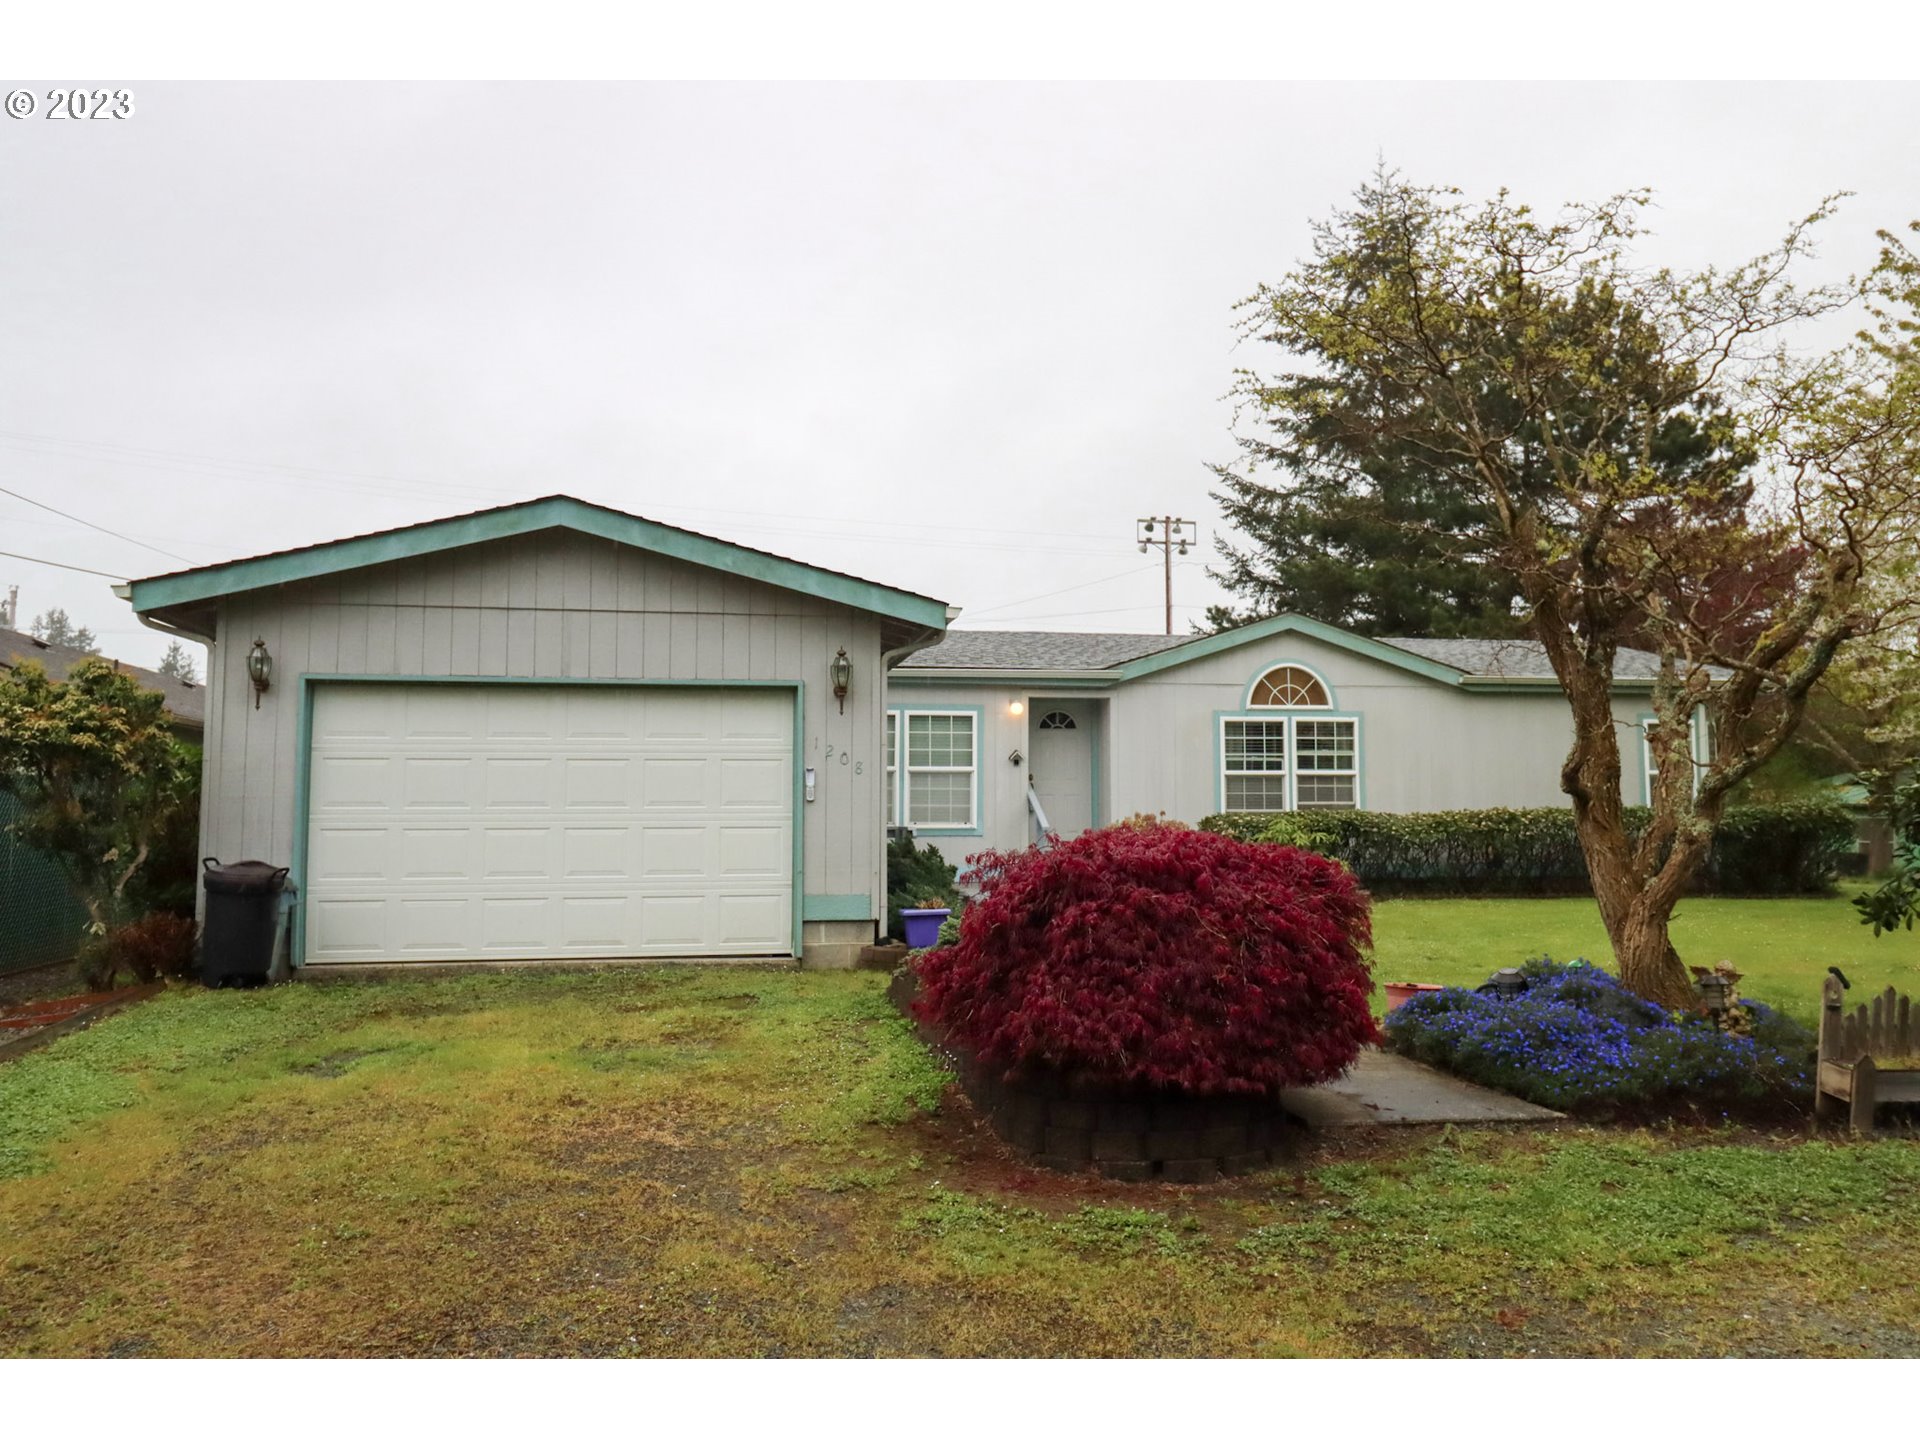 1208 N GRAPE ST, Coquille, OR 97423